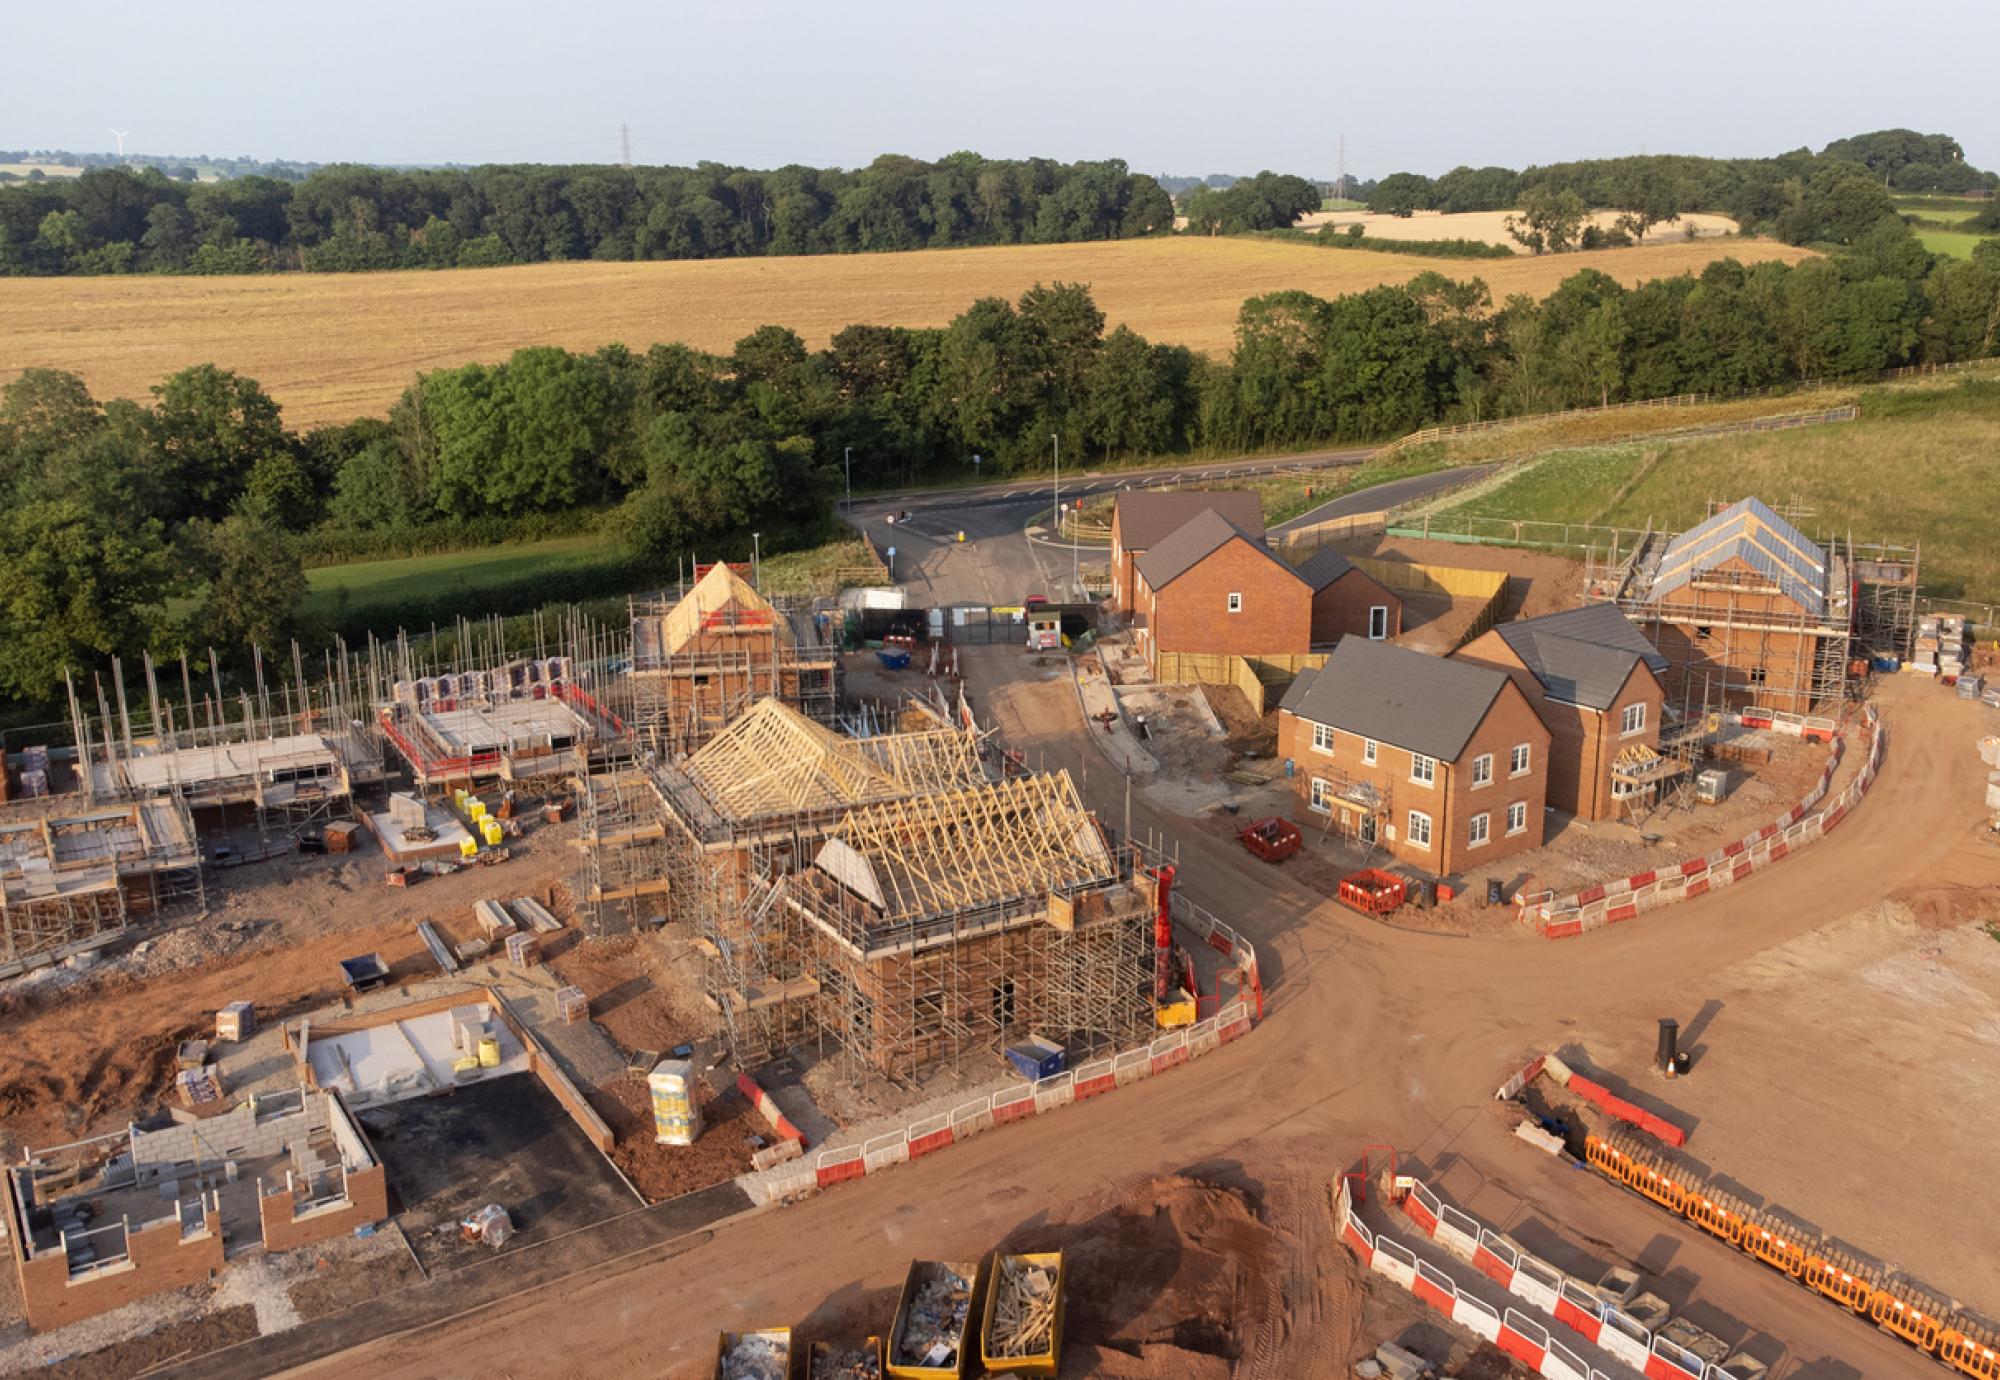 Aerial view looking down on new build housing construction site in England